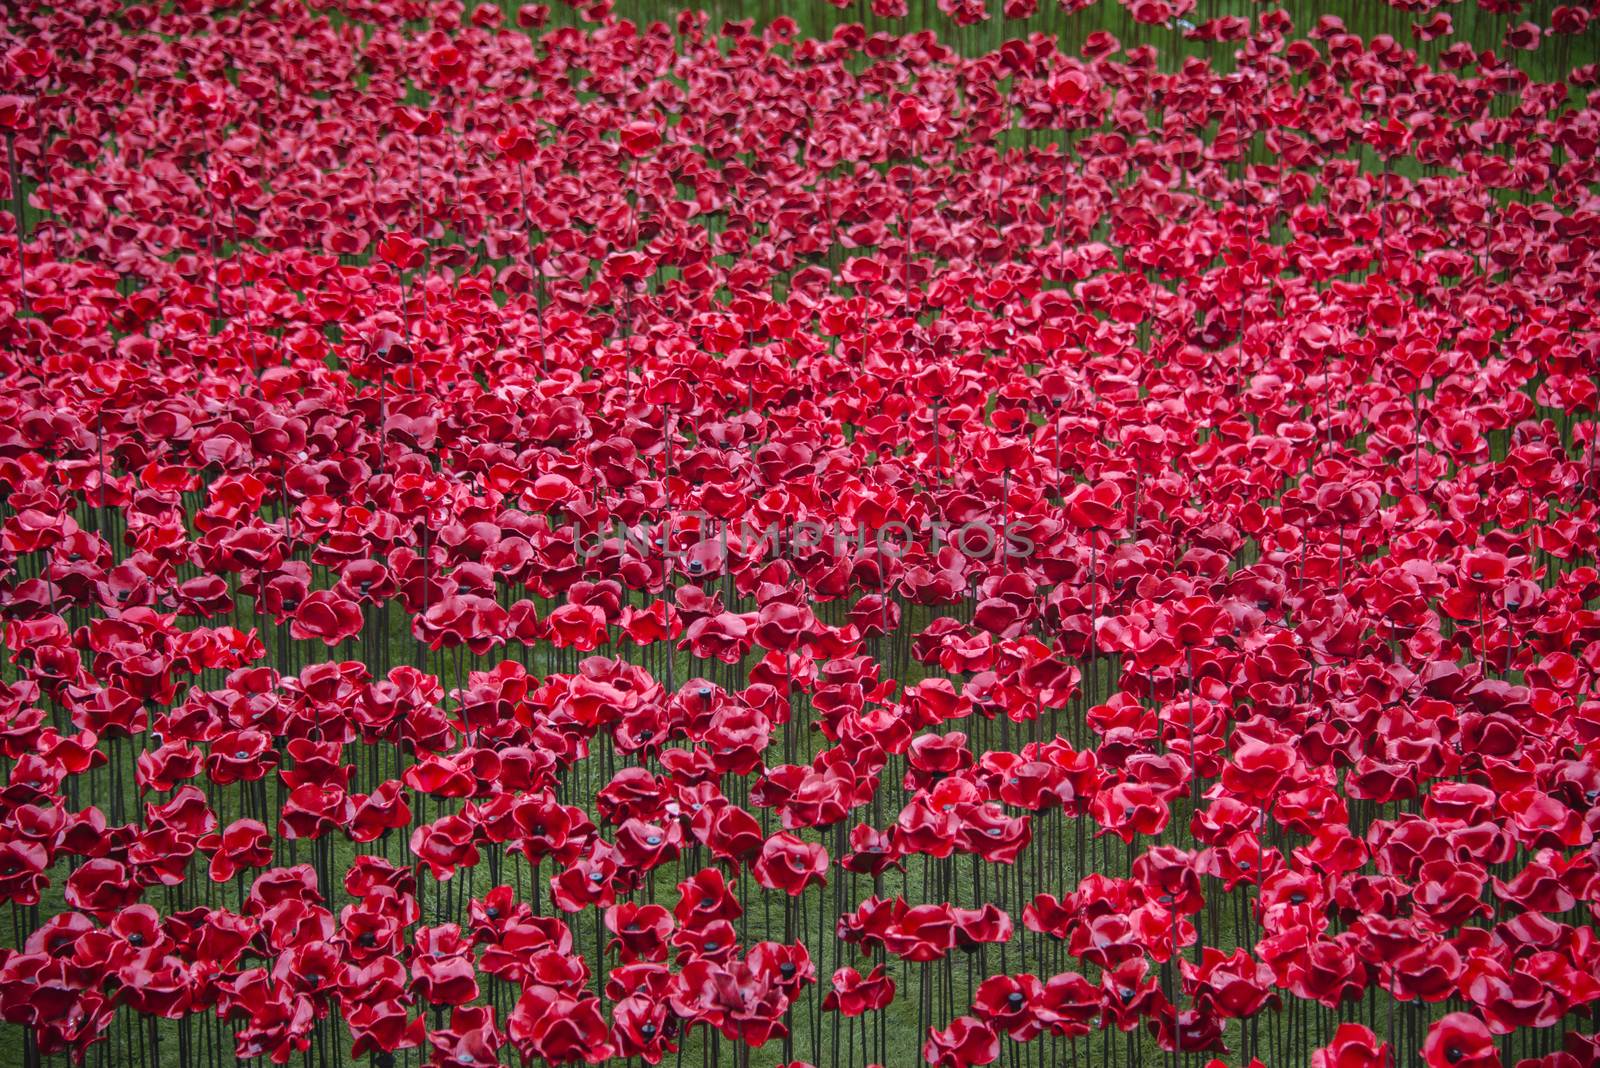 The Blood Swept Lands and Seas of Red installation in the moat of the Tower of London, 2014